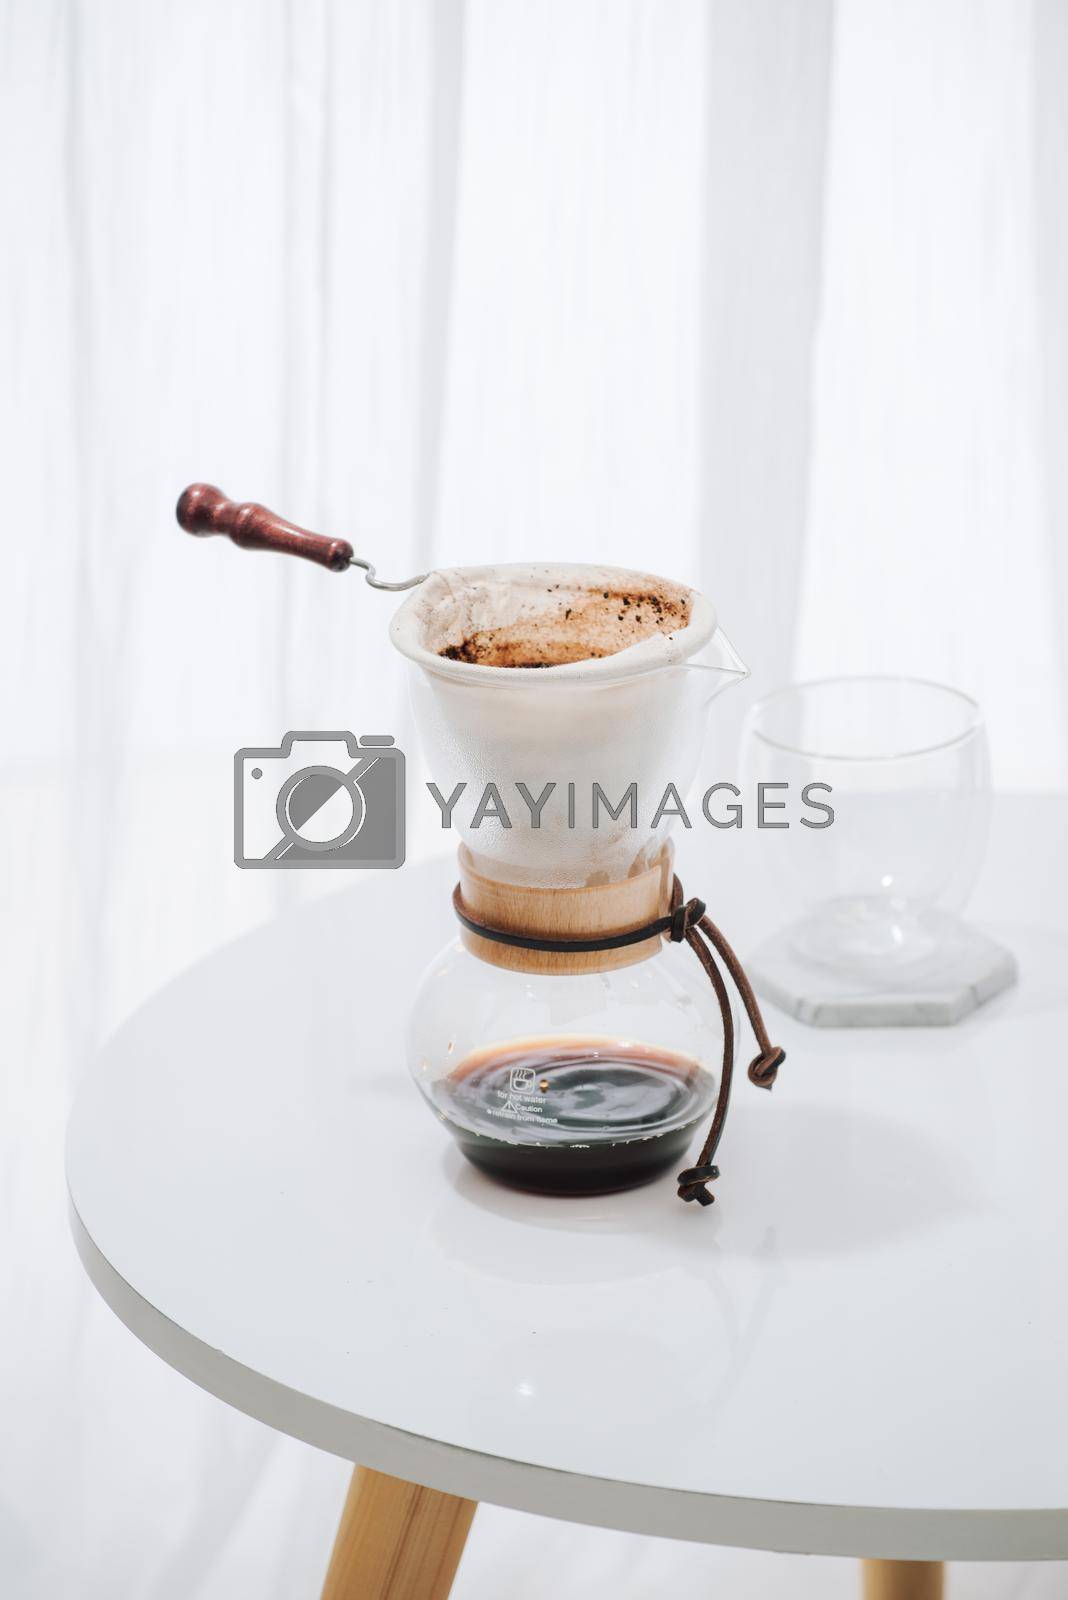 Royalty free image of Coffee drip set, Making coffee dripping in coffee shop by makidotvn